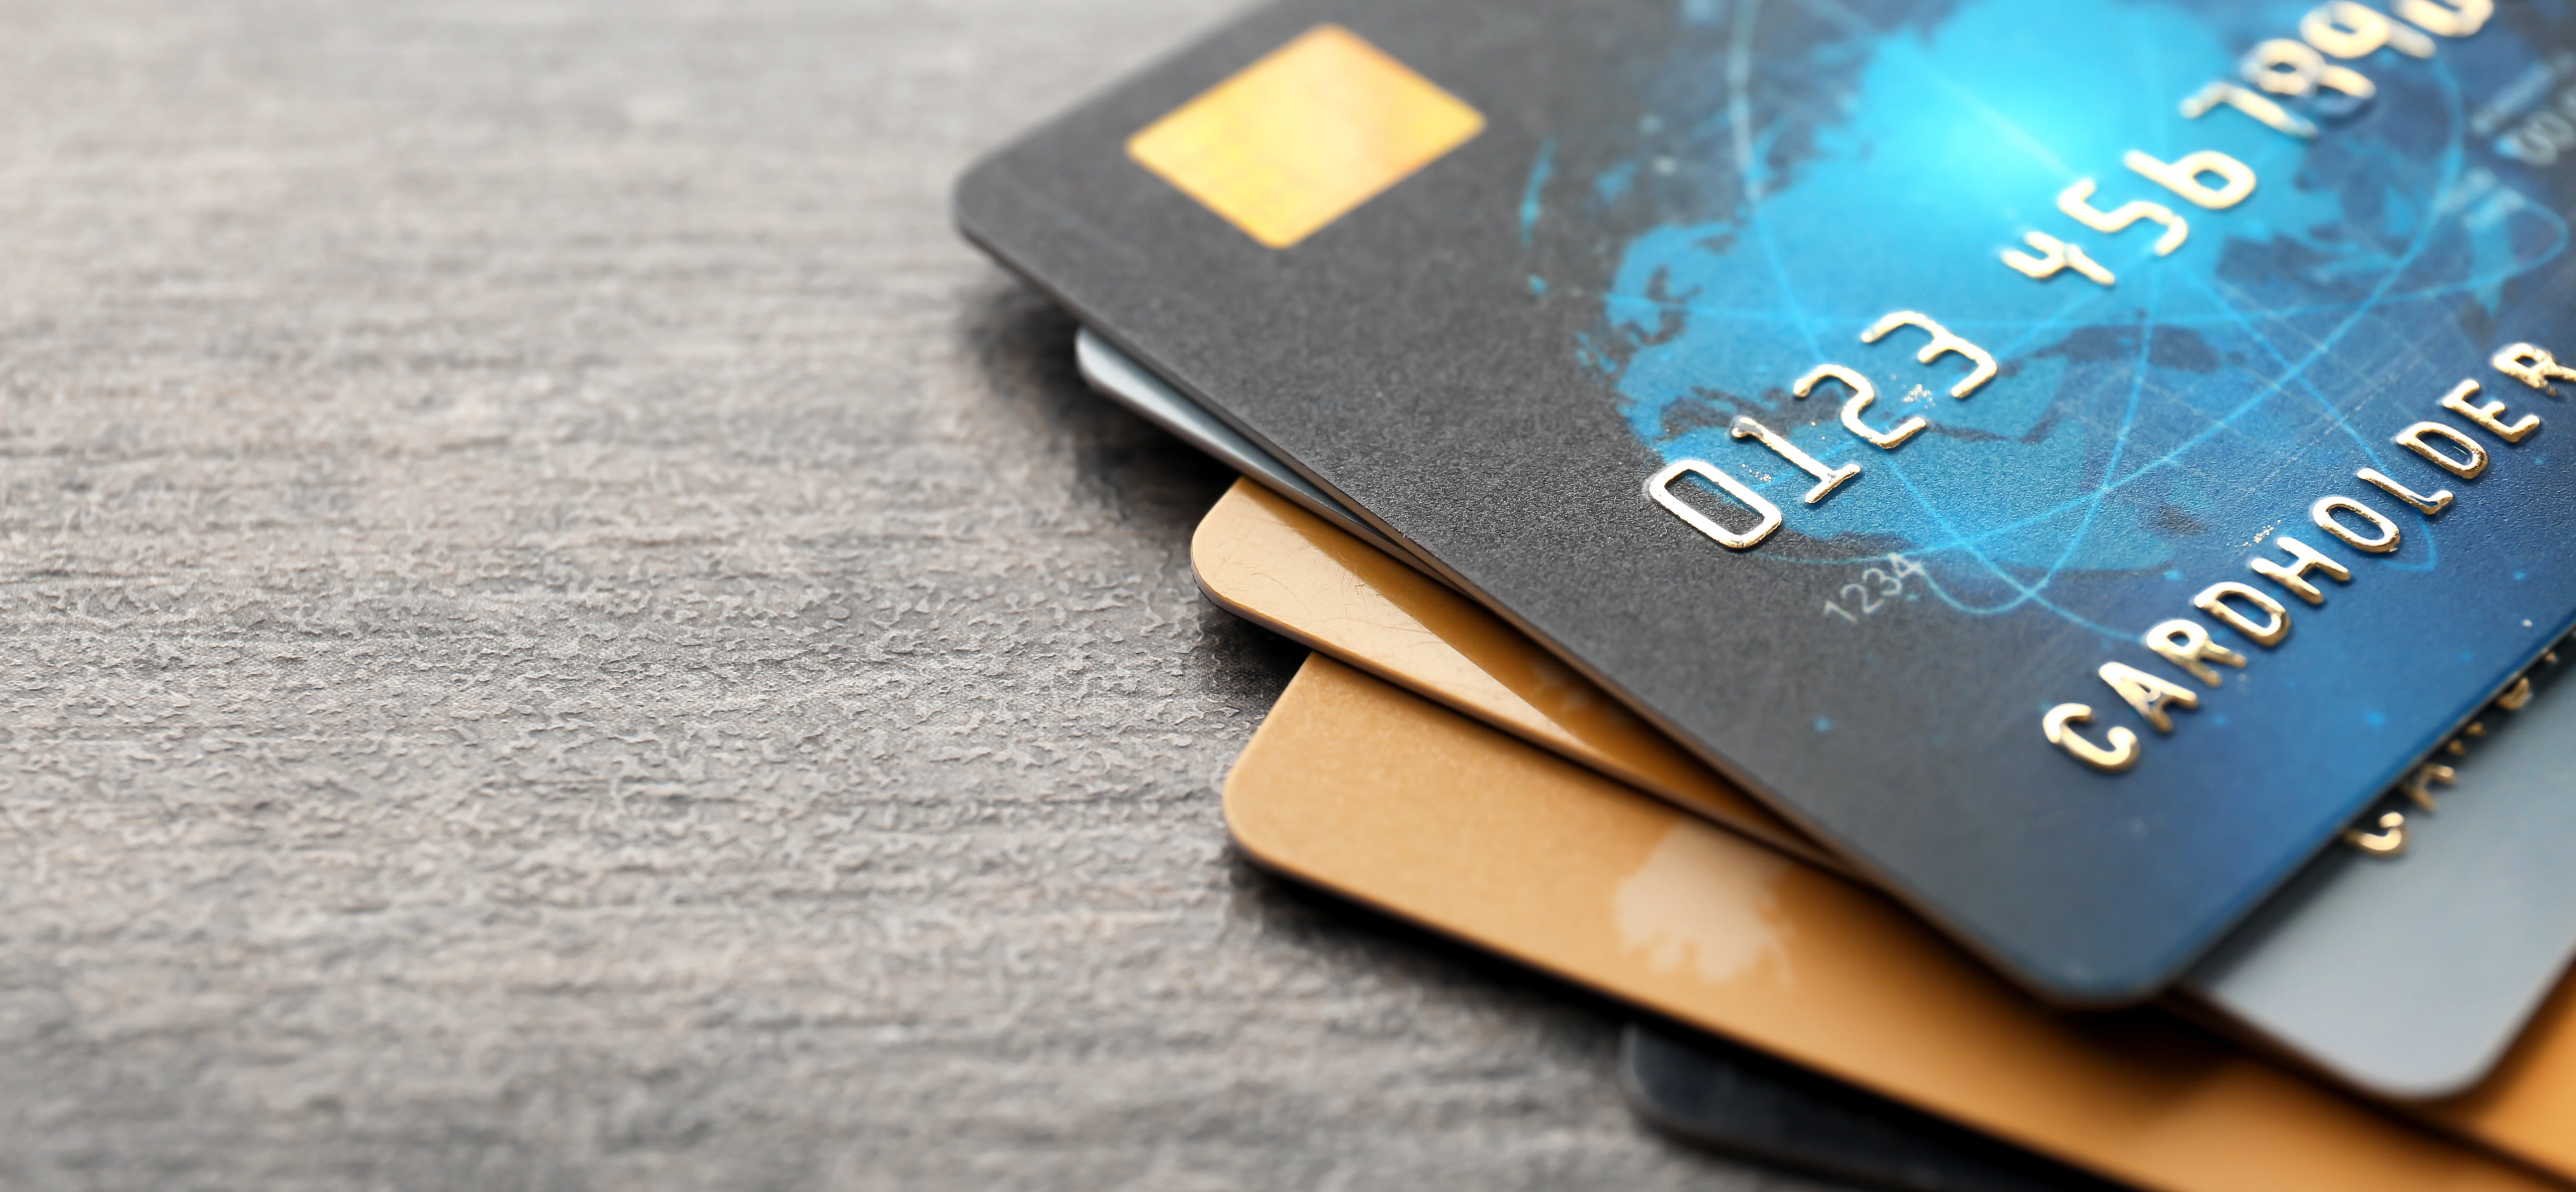 The 9 Best Premium and Luxury Credit Cards [2021]